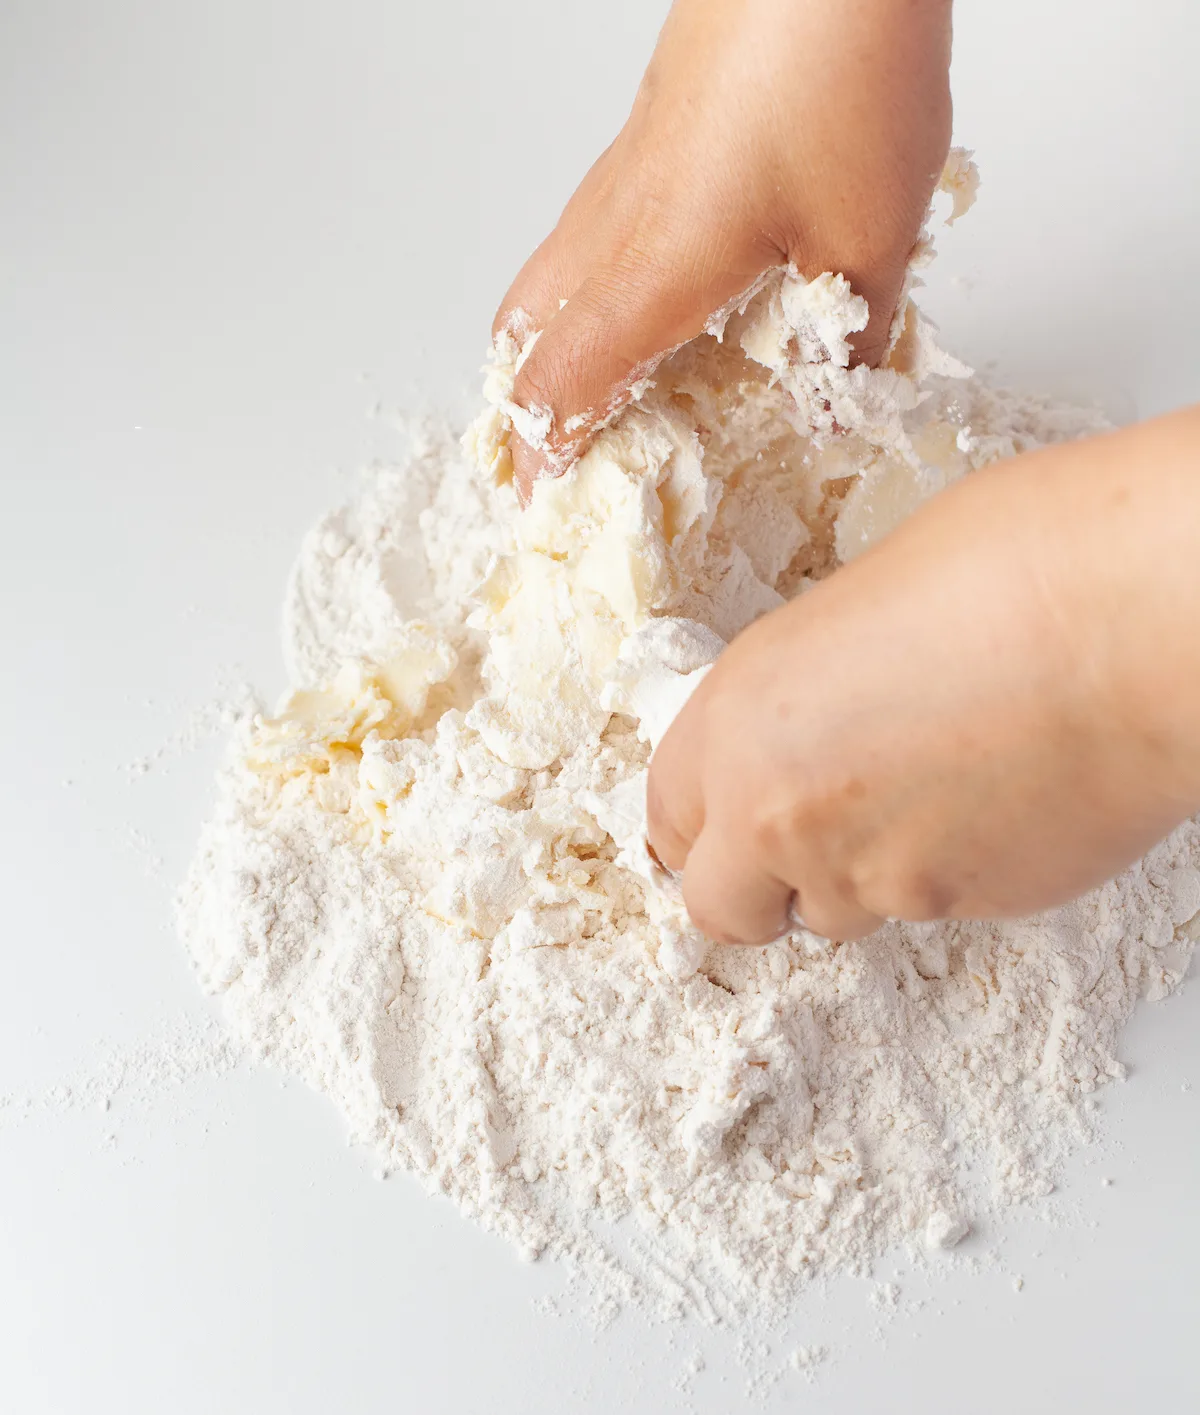 Hands kneading the flour, butter, and salt together